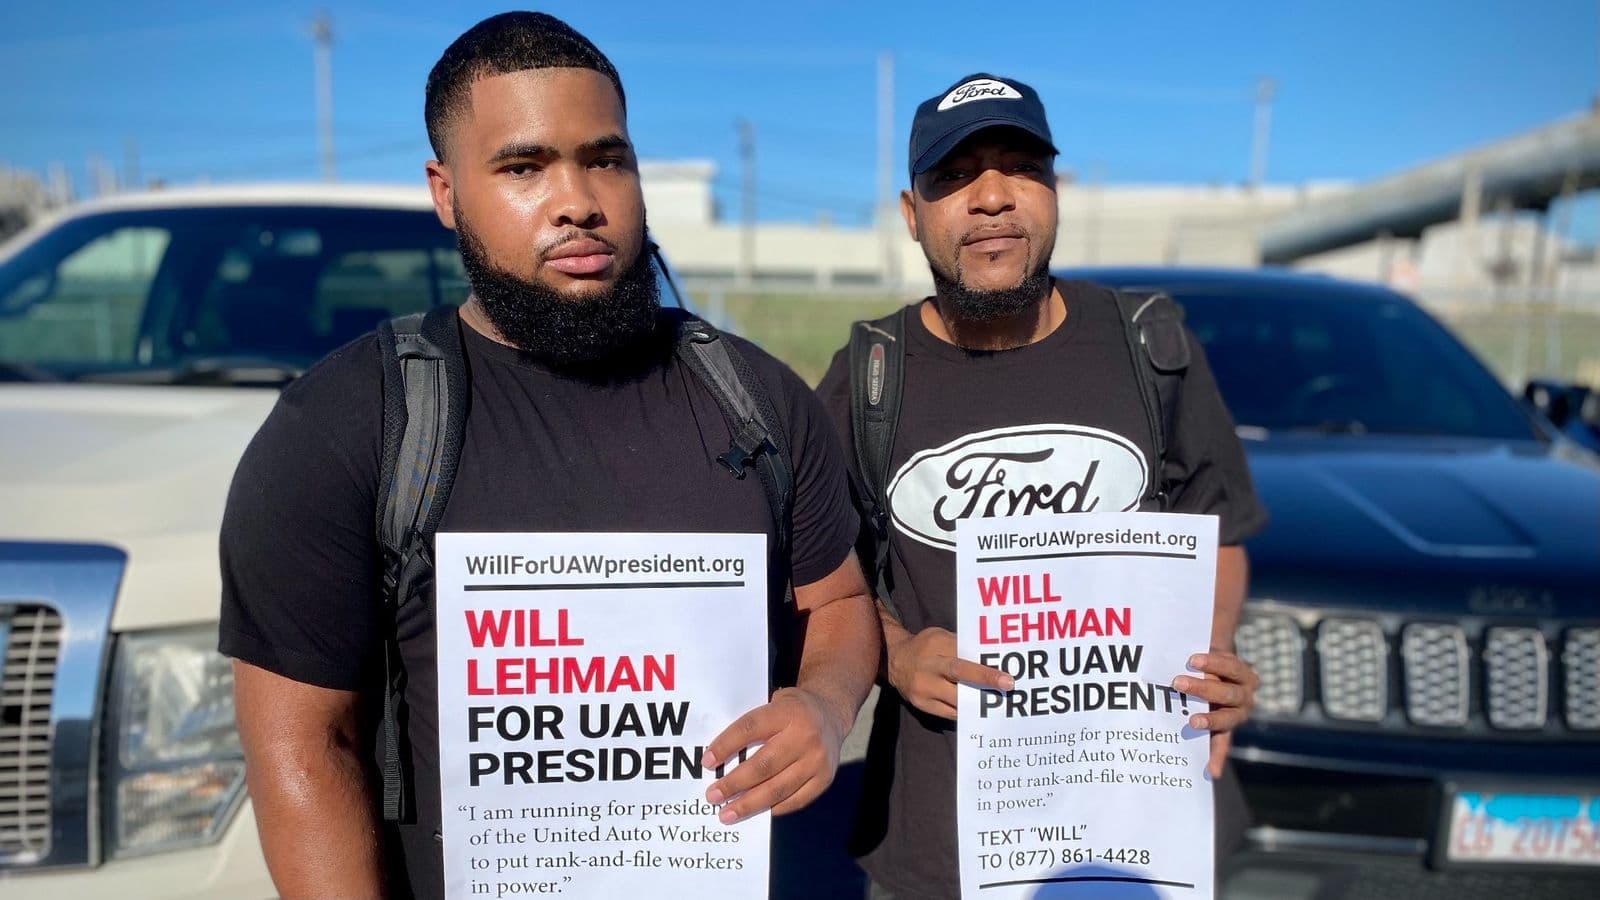 Chicago Ford workers showing support for Will Lehman for UAW President in July 2022